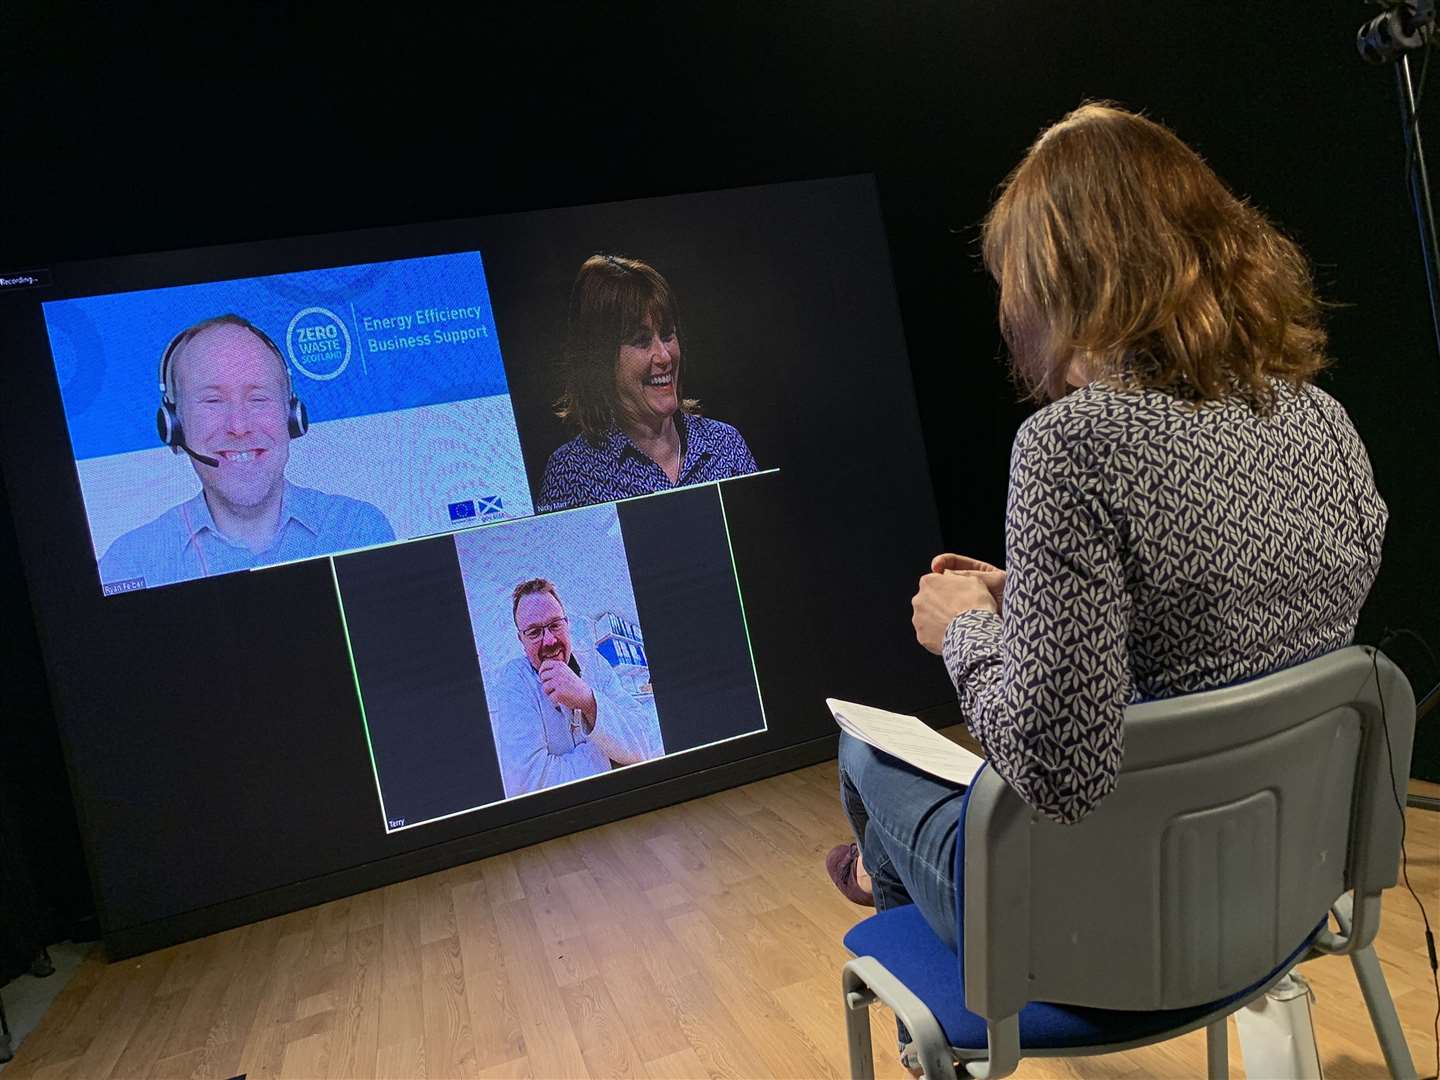 Nicky Marr interviews Terry Stebbings and Ryan Felber as part of the Virtual SHREC conference.